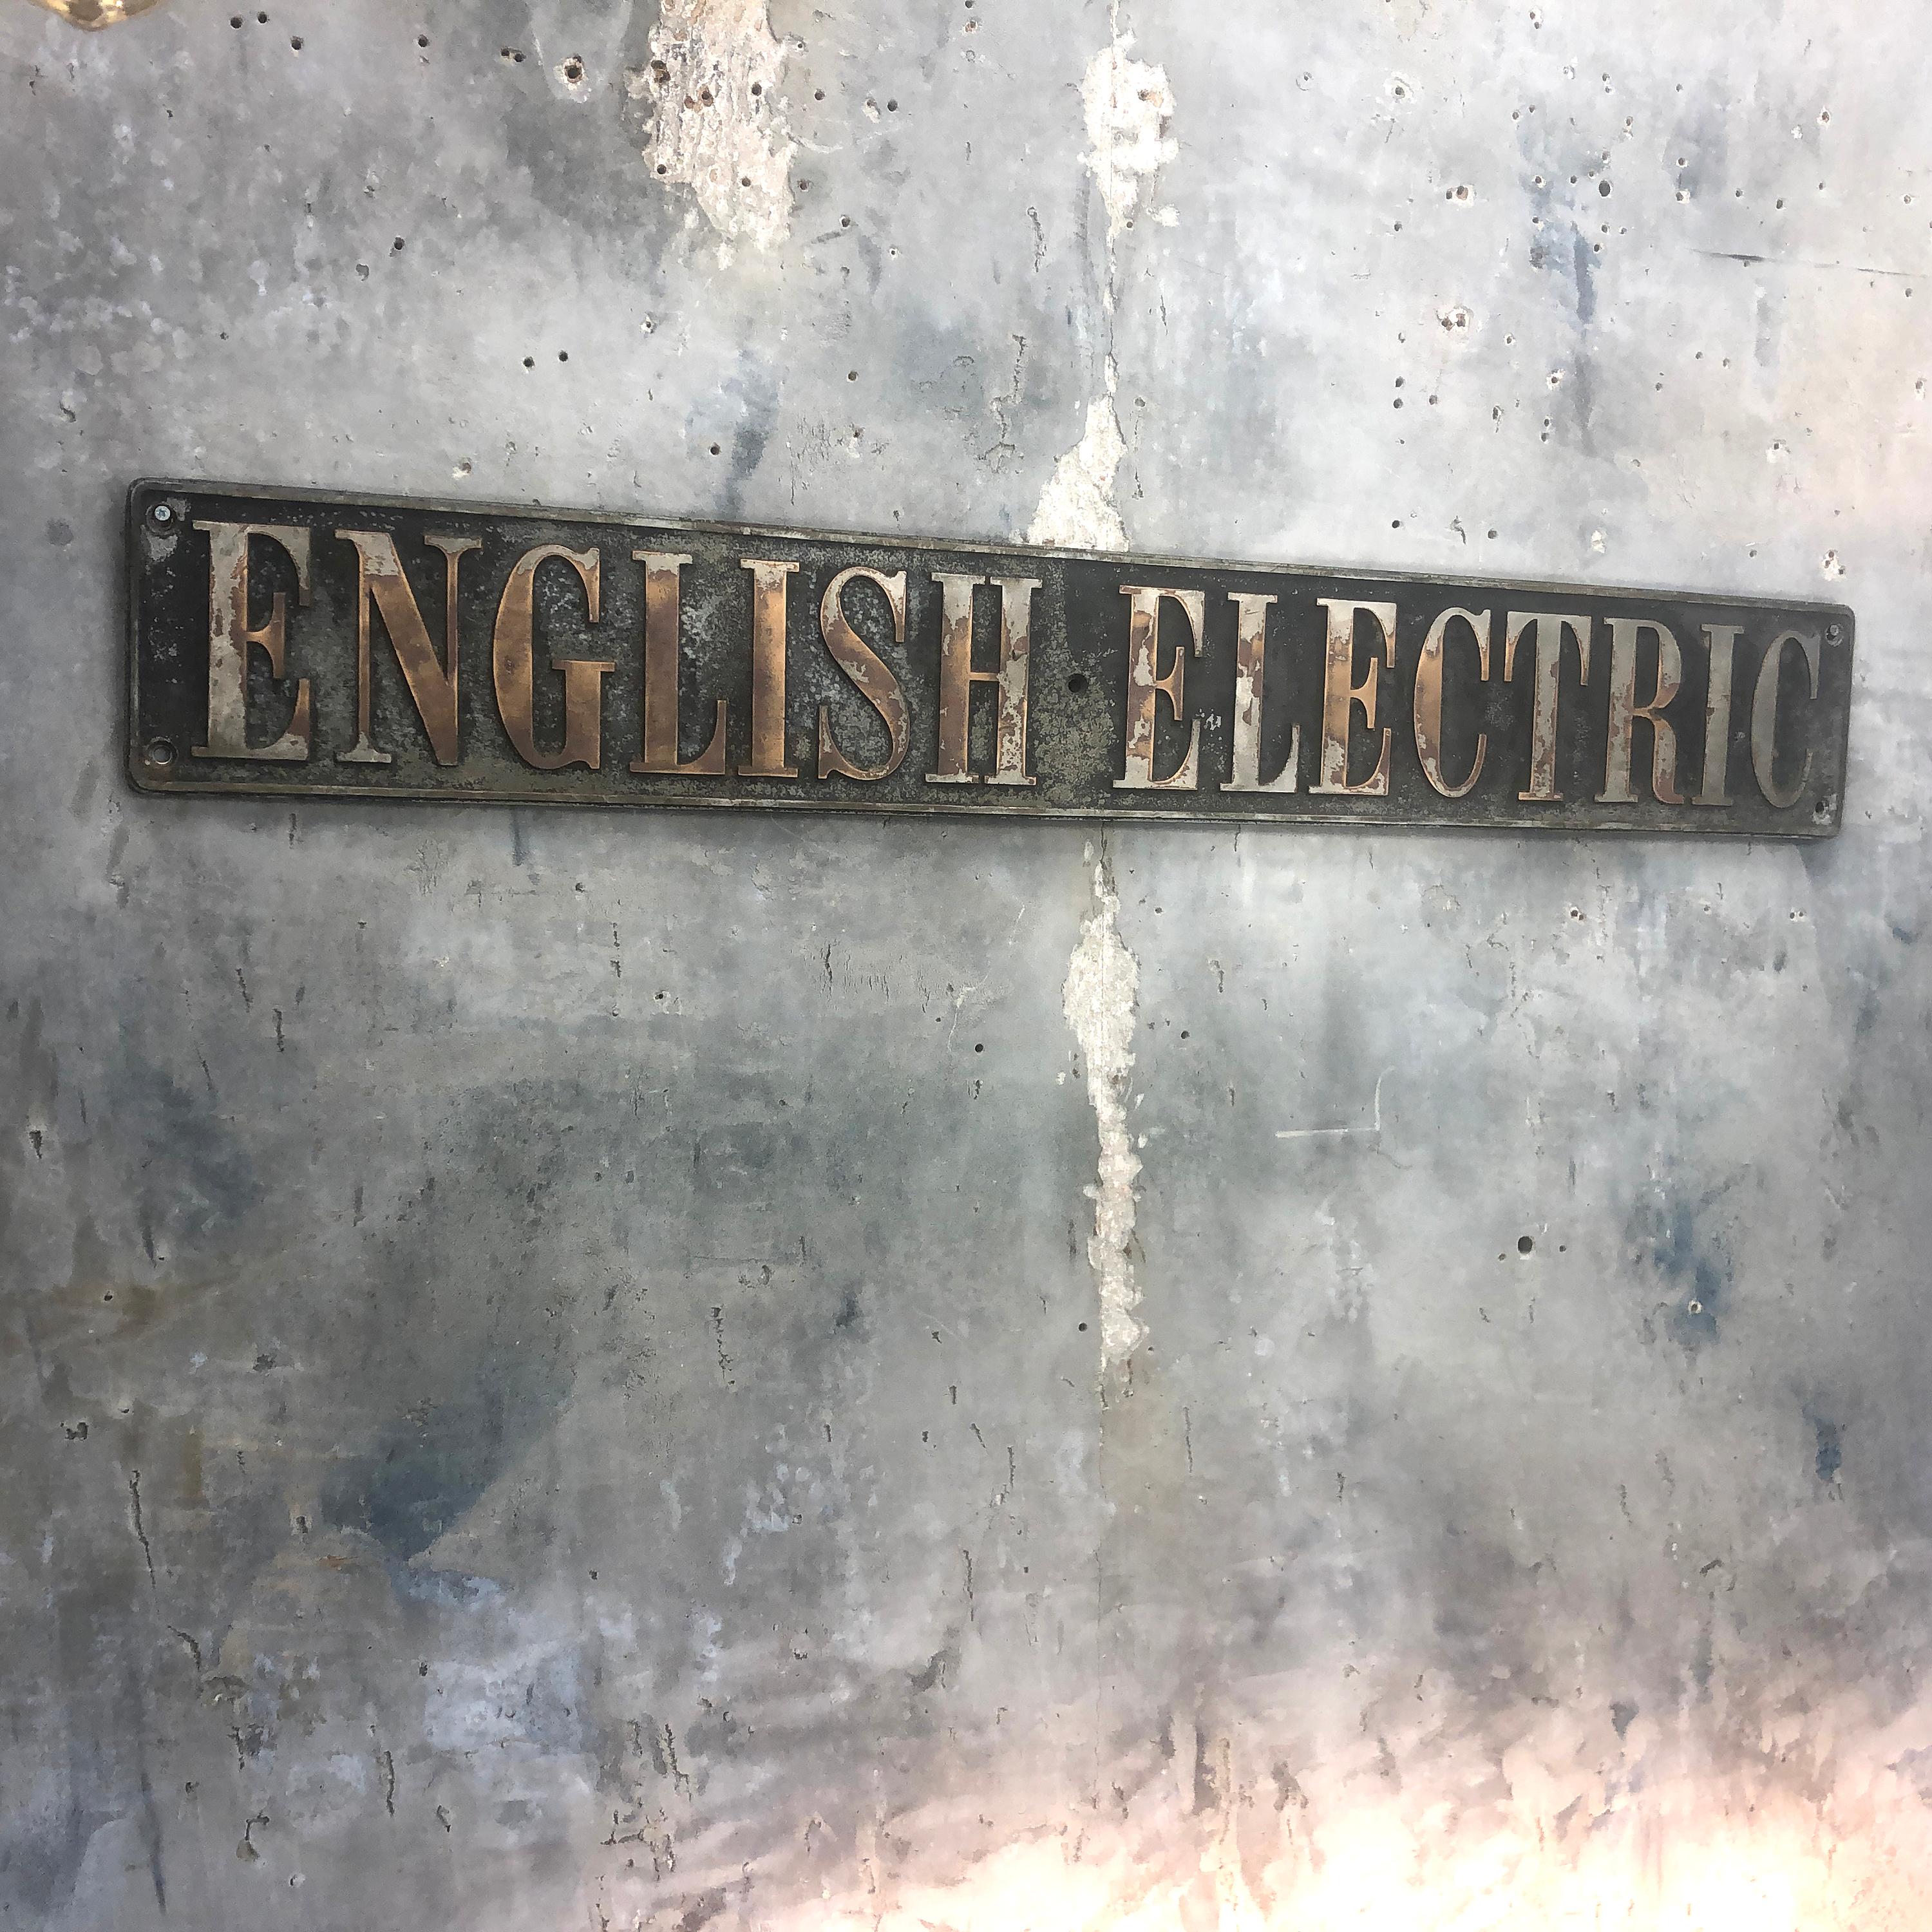 An original English electric locomotive plate made from nickel plated brass. 

Measuring 120cm x 18cm x 1cm. Weighing approximately 15kg

The English Electric Company Limited was a British industrial manufacturer formed after World War 1. It